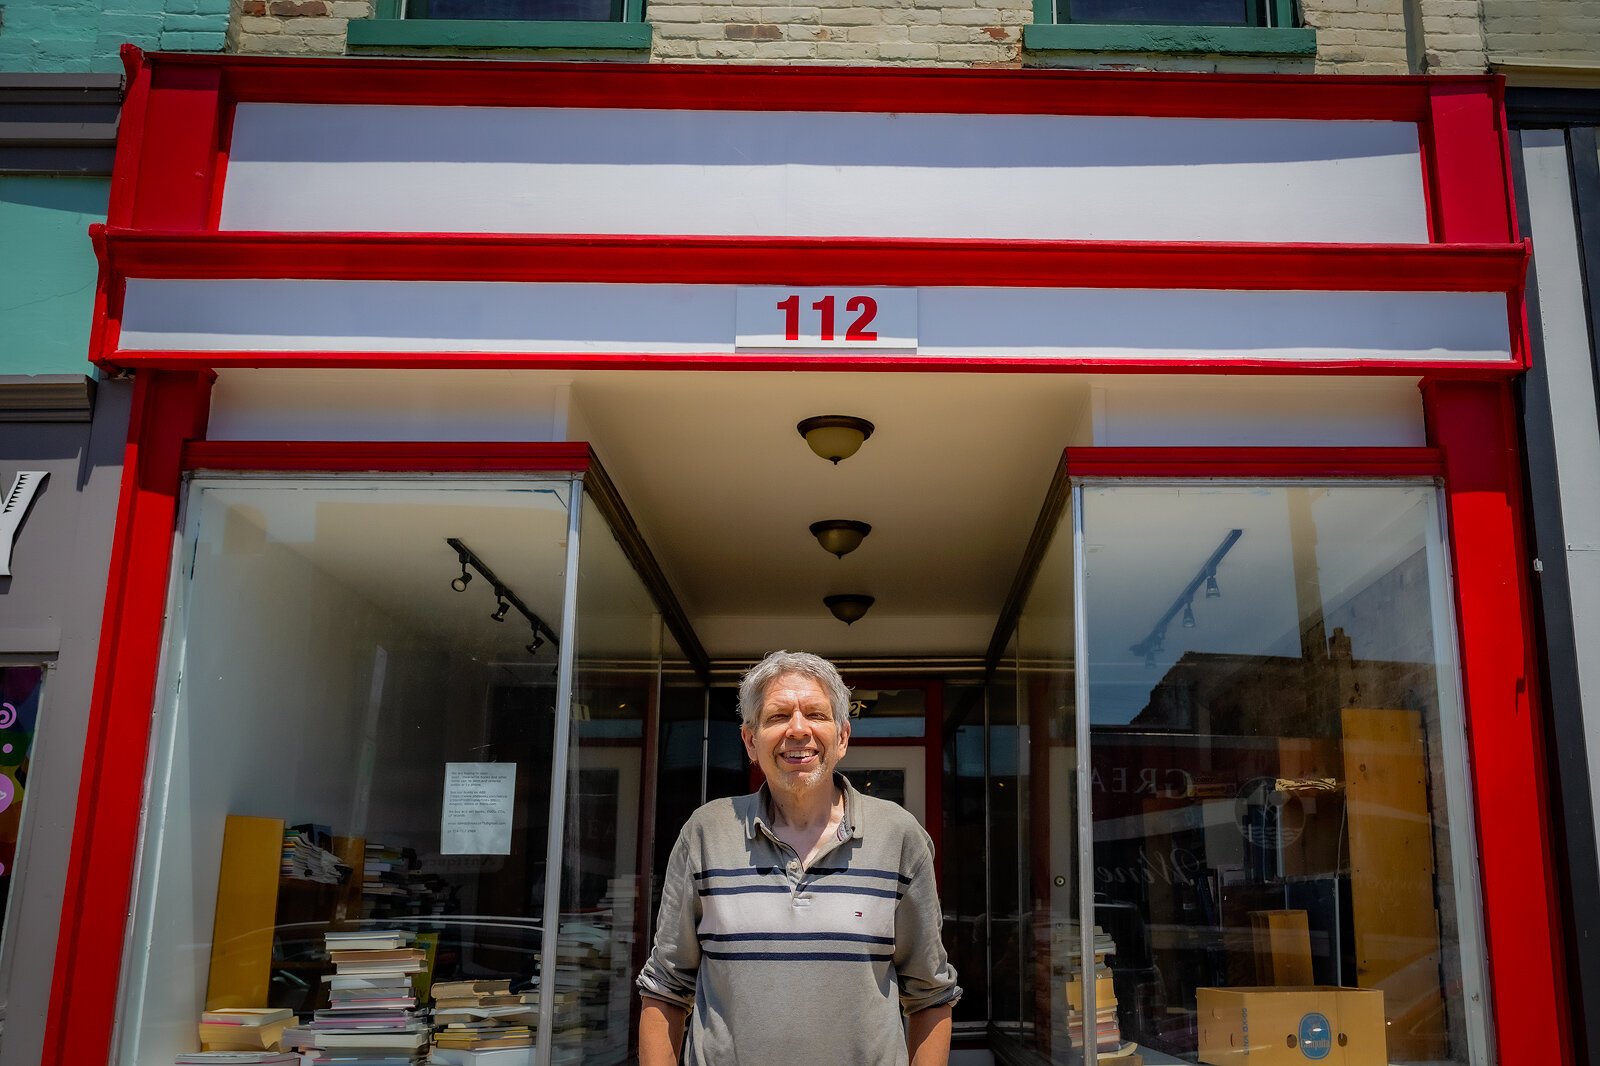 Ed Koster at his soon to open downtown Ypsilanti bookstore.